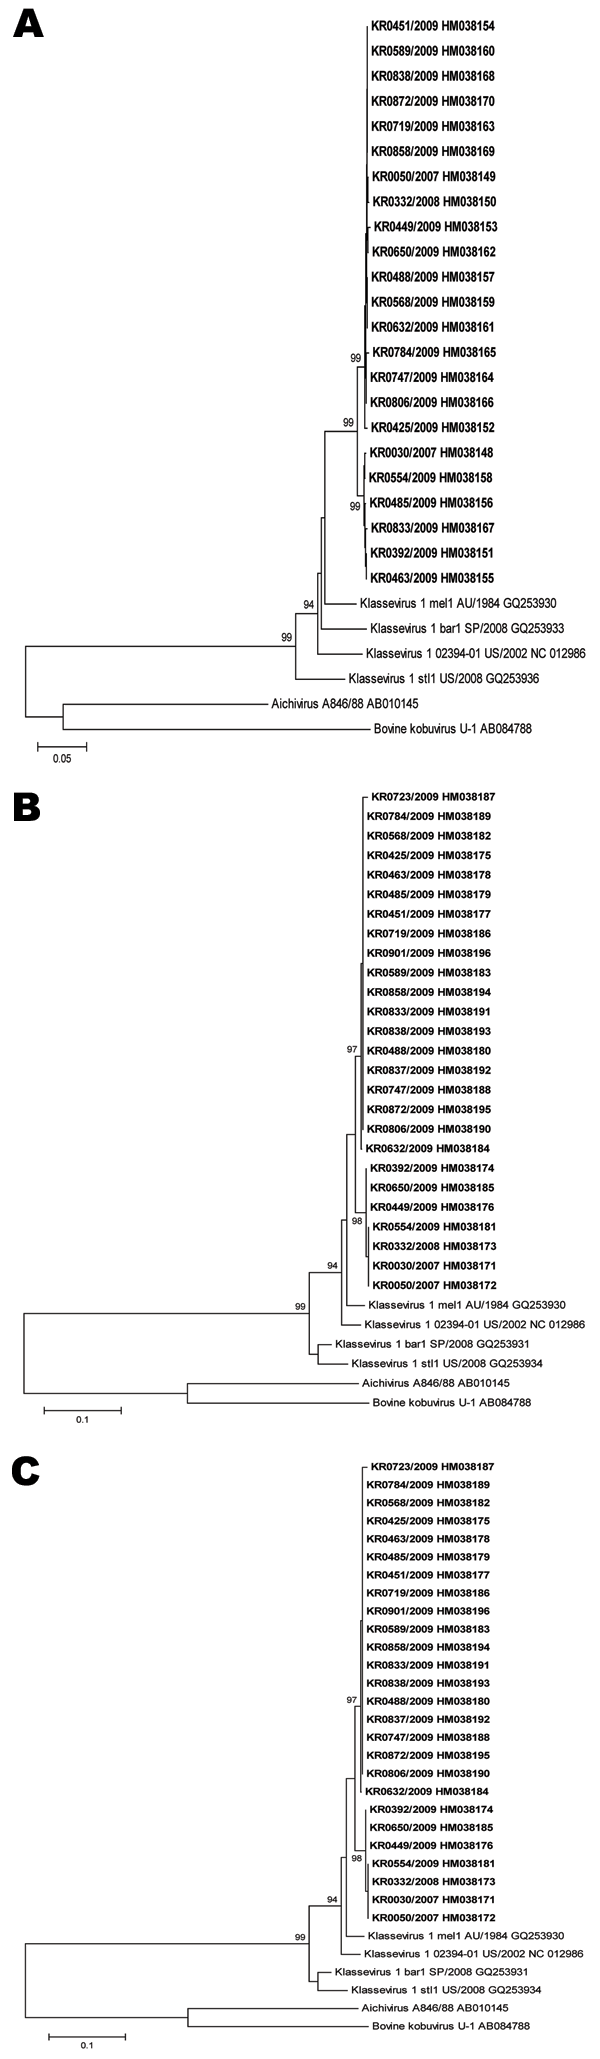 Phylogenetic analysis of the A) partial viral protein (VP) 0/VP1 (852 bp), B) 3D (668 bp), and C) 2C (345 bp) gene sequences of klassevirus-1 strains. The klassevirus-1 strains isolated in this study are indicated in boldface. The tree was constructed by using the neighbor-joining method with Kimura 2-parameter estimation. The bootstrap values from 1,000 replicates are present on each branch. The nucleotide sequences identified in this study have been deposited in GenBank under accession nos. HM